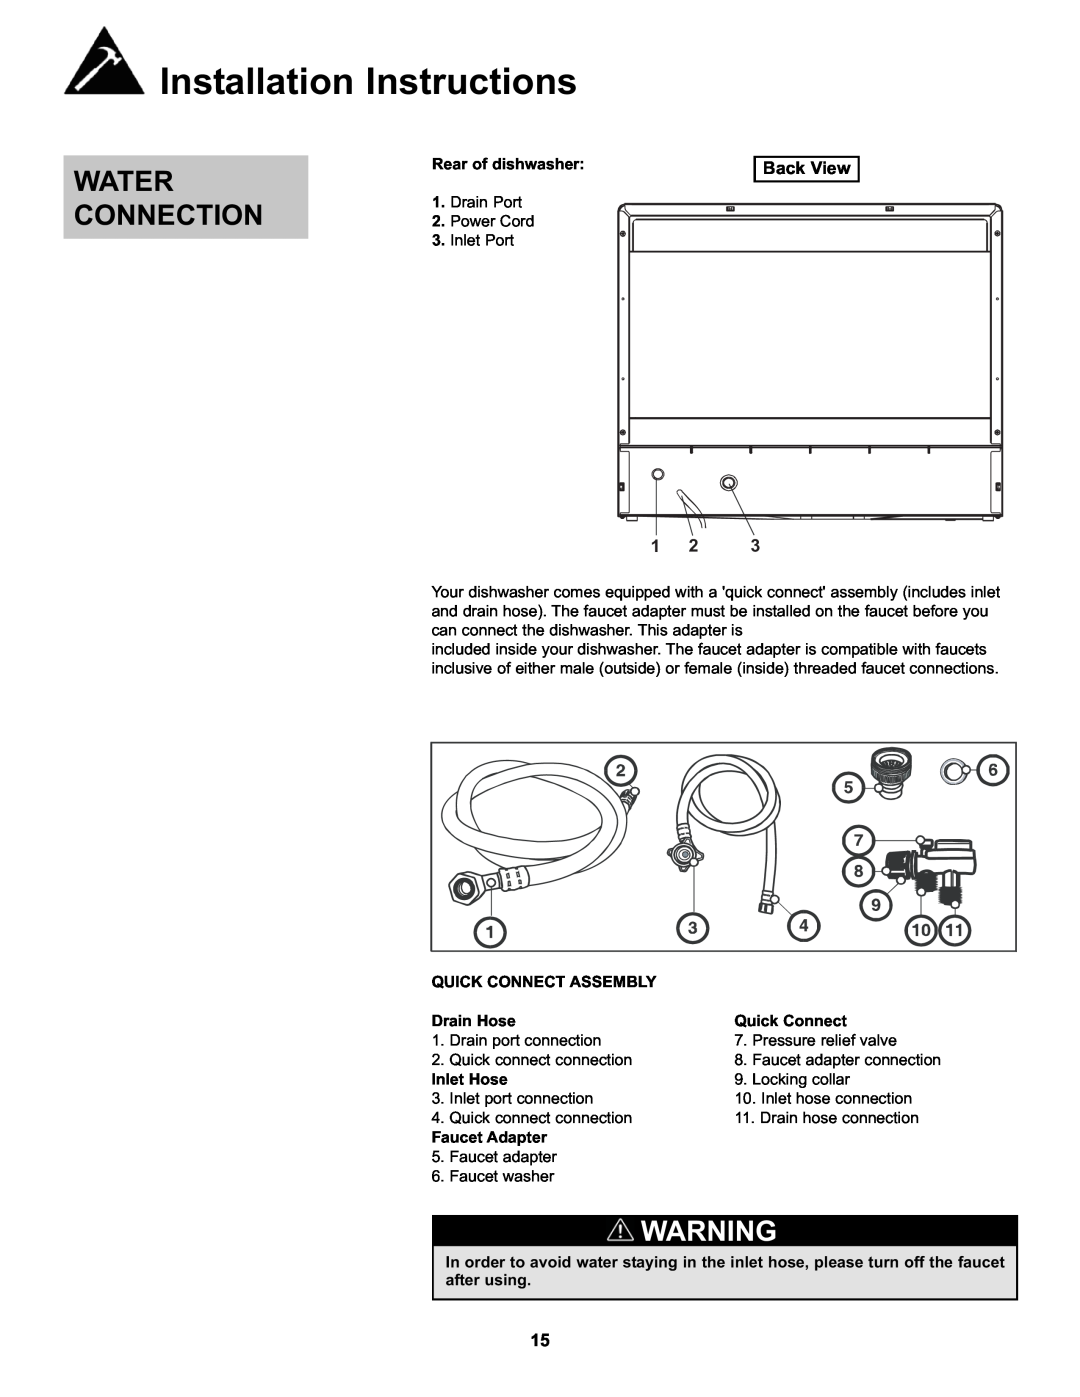 Danby DDW611WLED manual Water Connection, Installation Instructions, Rear of dishwasher, Quick Connect Assembly, Drain Hose 